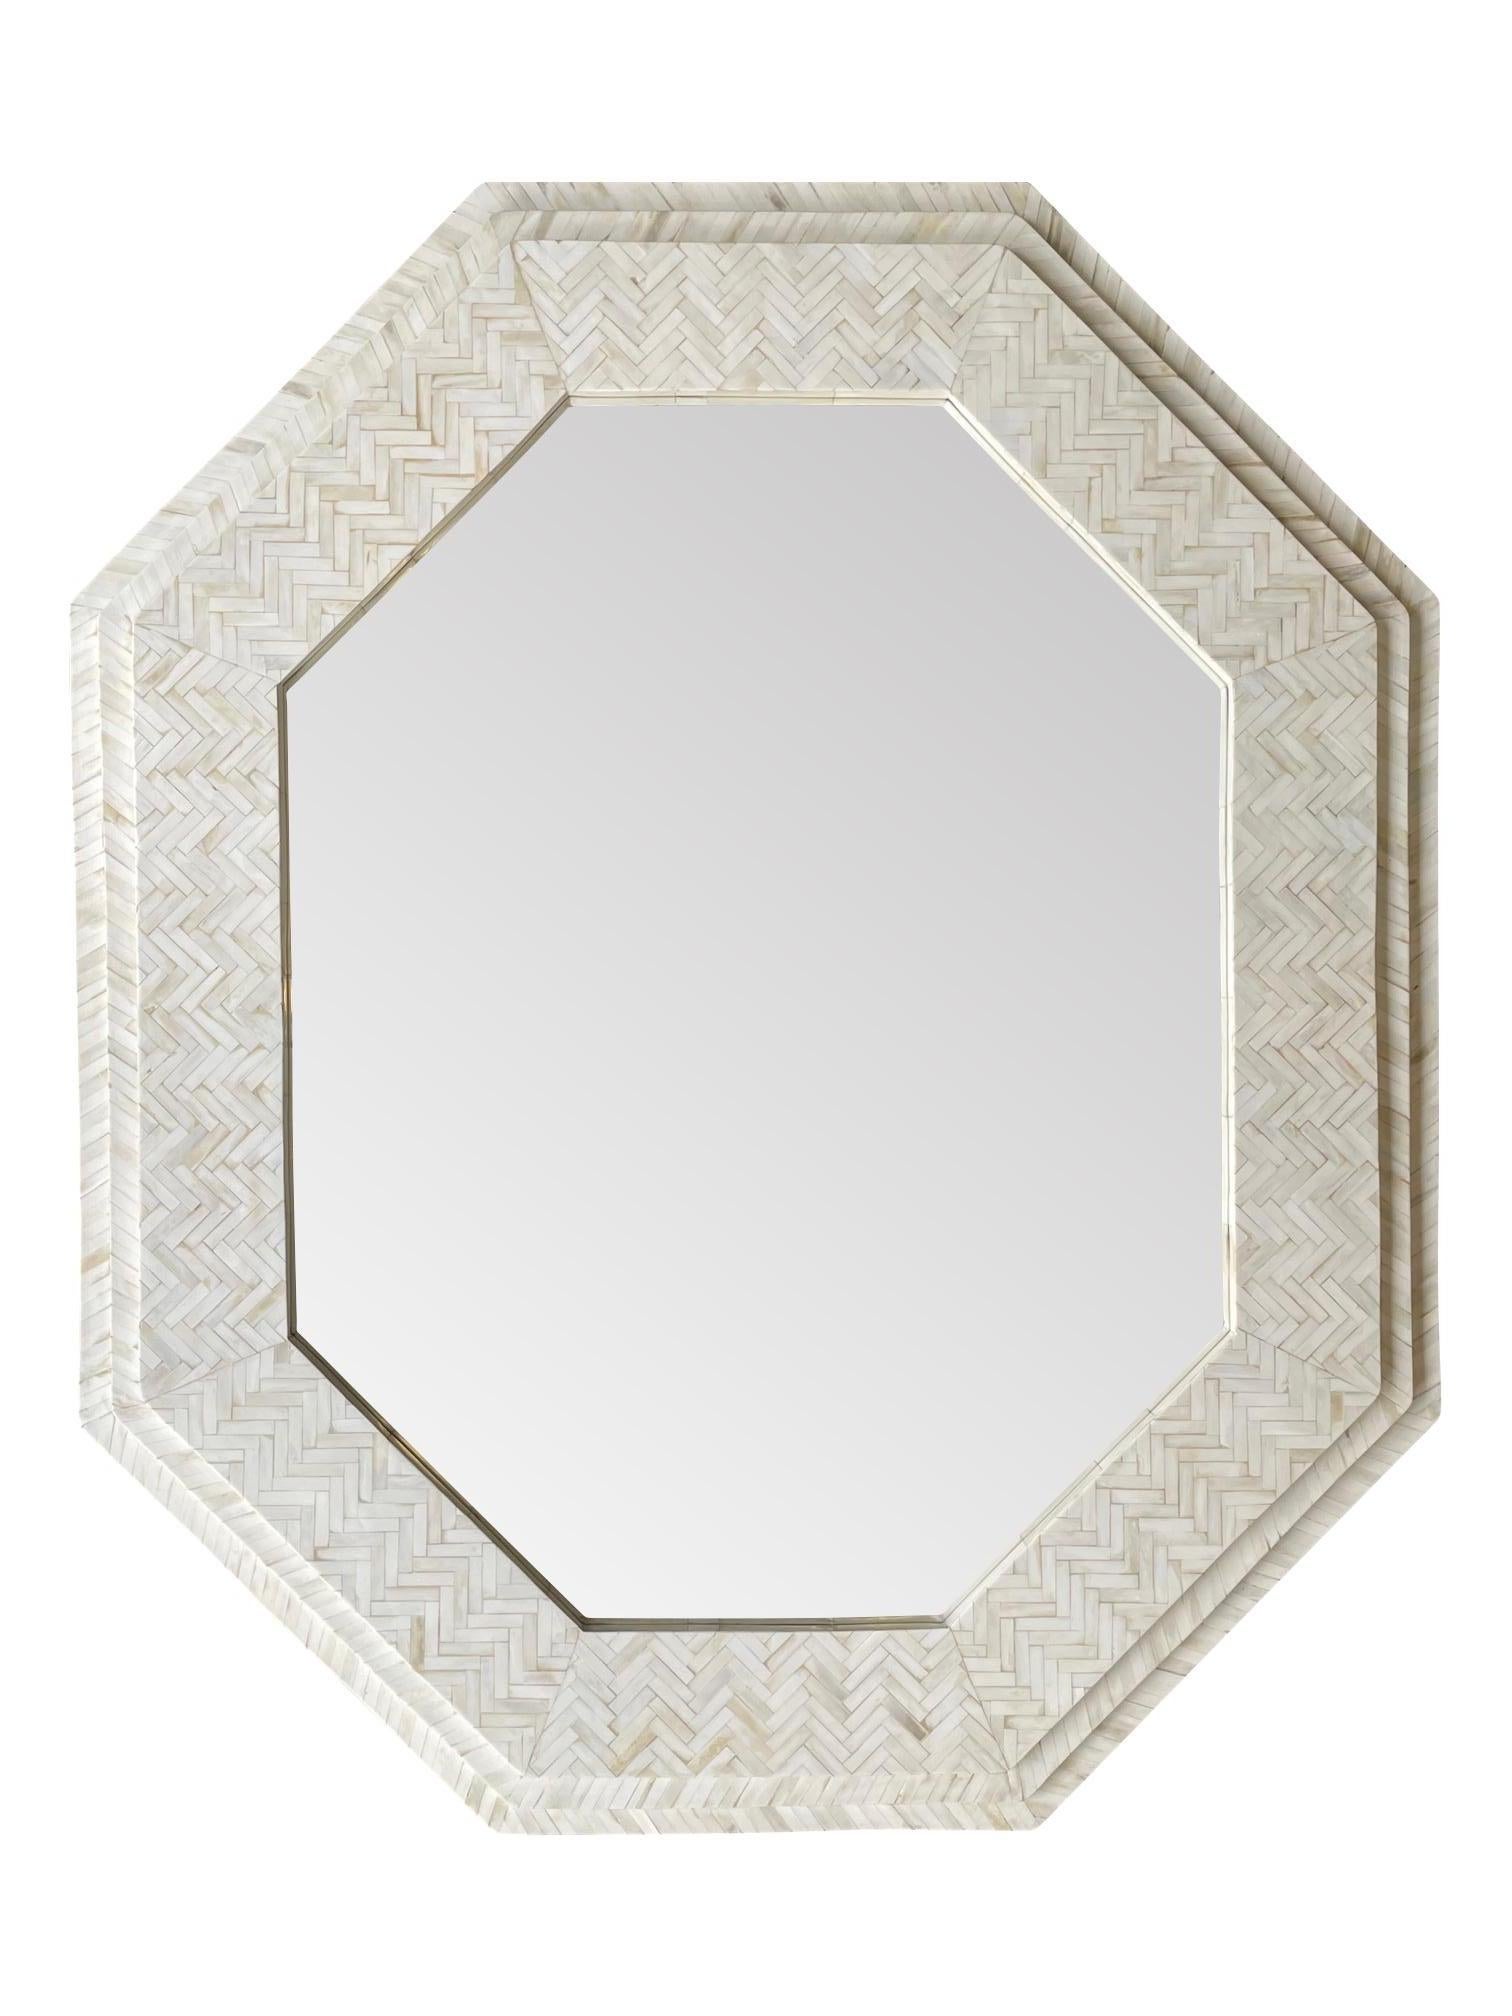 Large Handmade Inlaid Bone Octagonal Mirror in the Style of Enrique Garcel For Sale 1